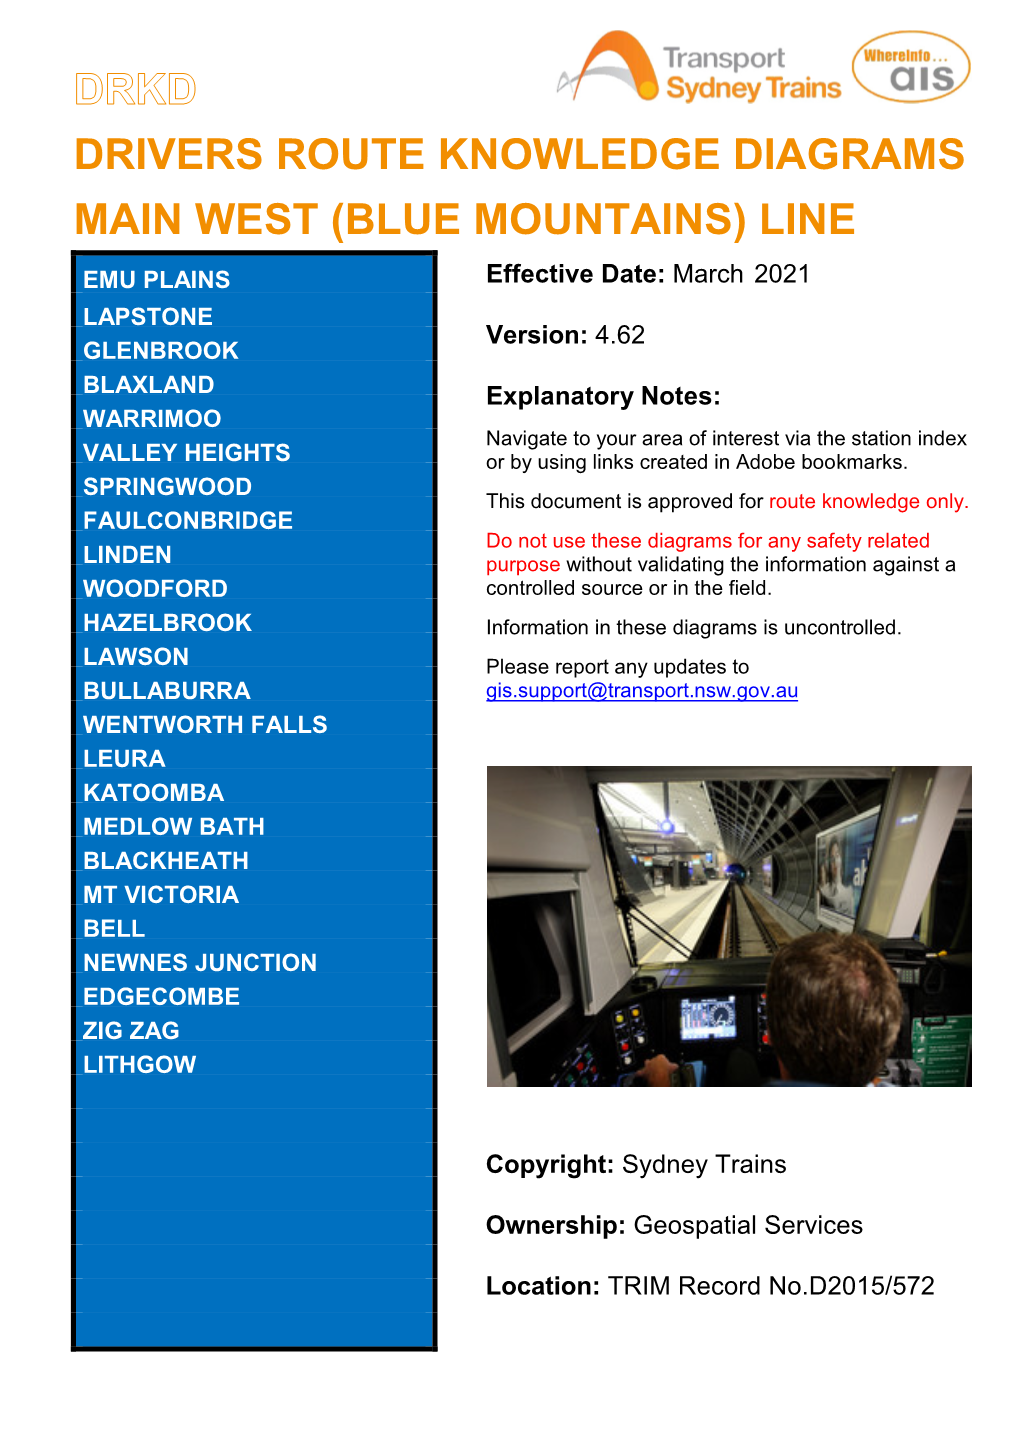 Drkd Drivers Route Knowledge Diagrams Main West (Blue Mountains) Line